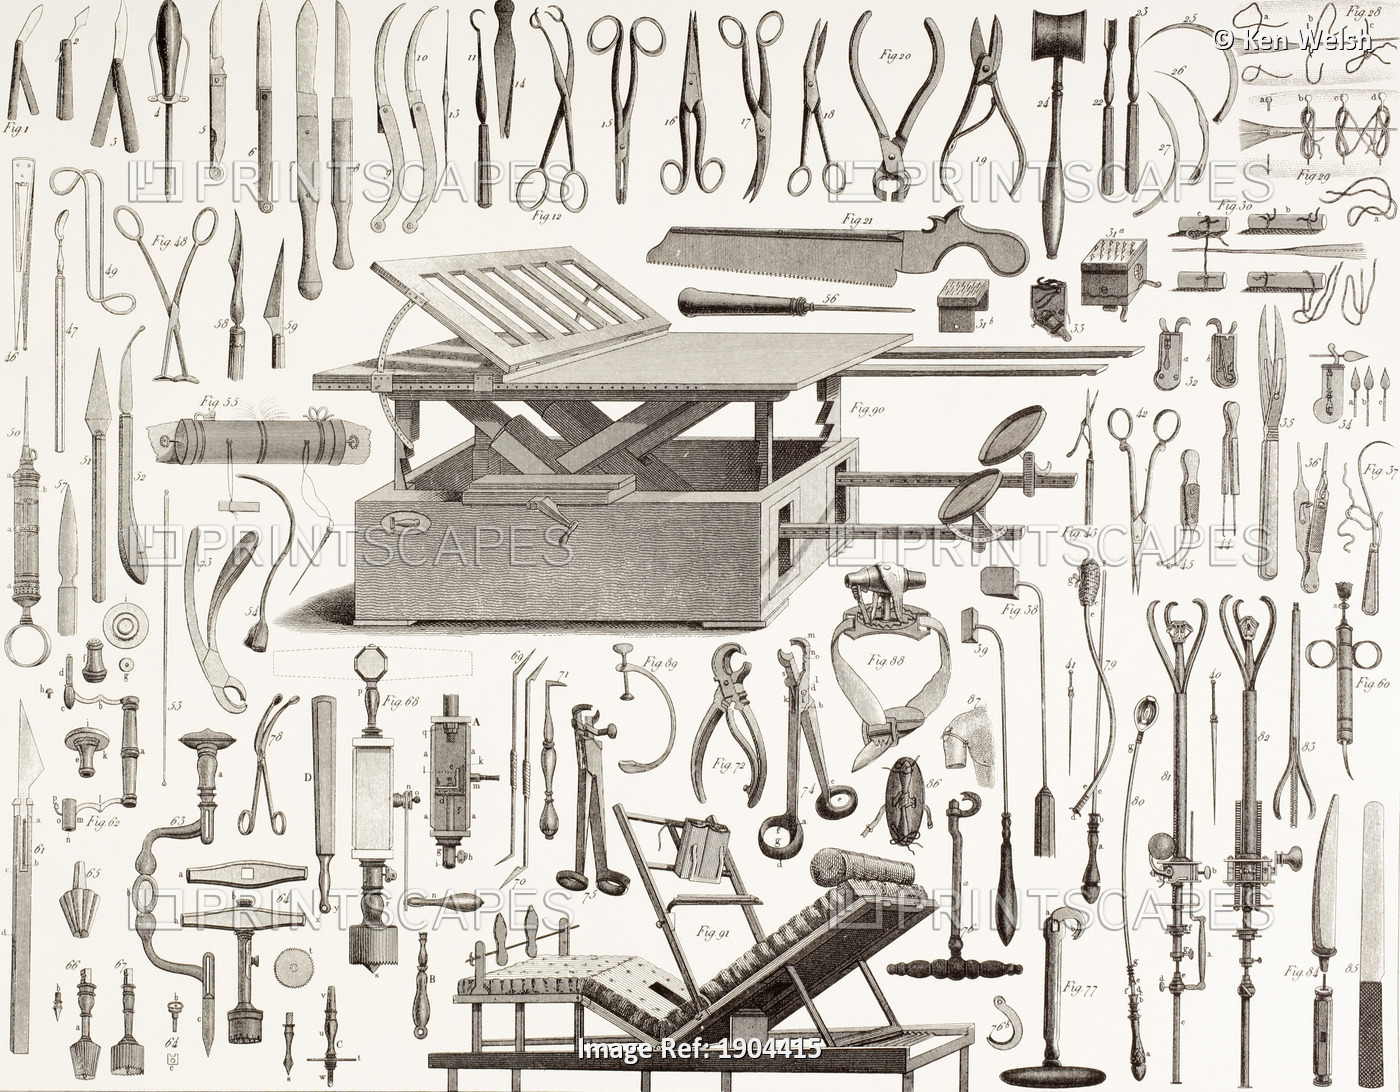 19Th Century Surgical Instruments.